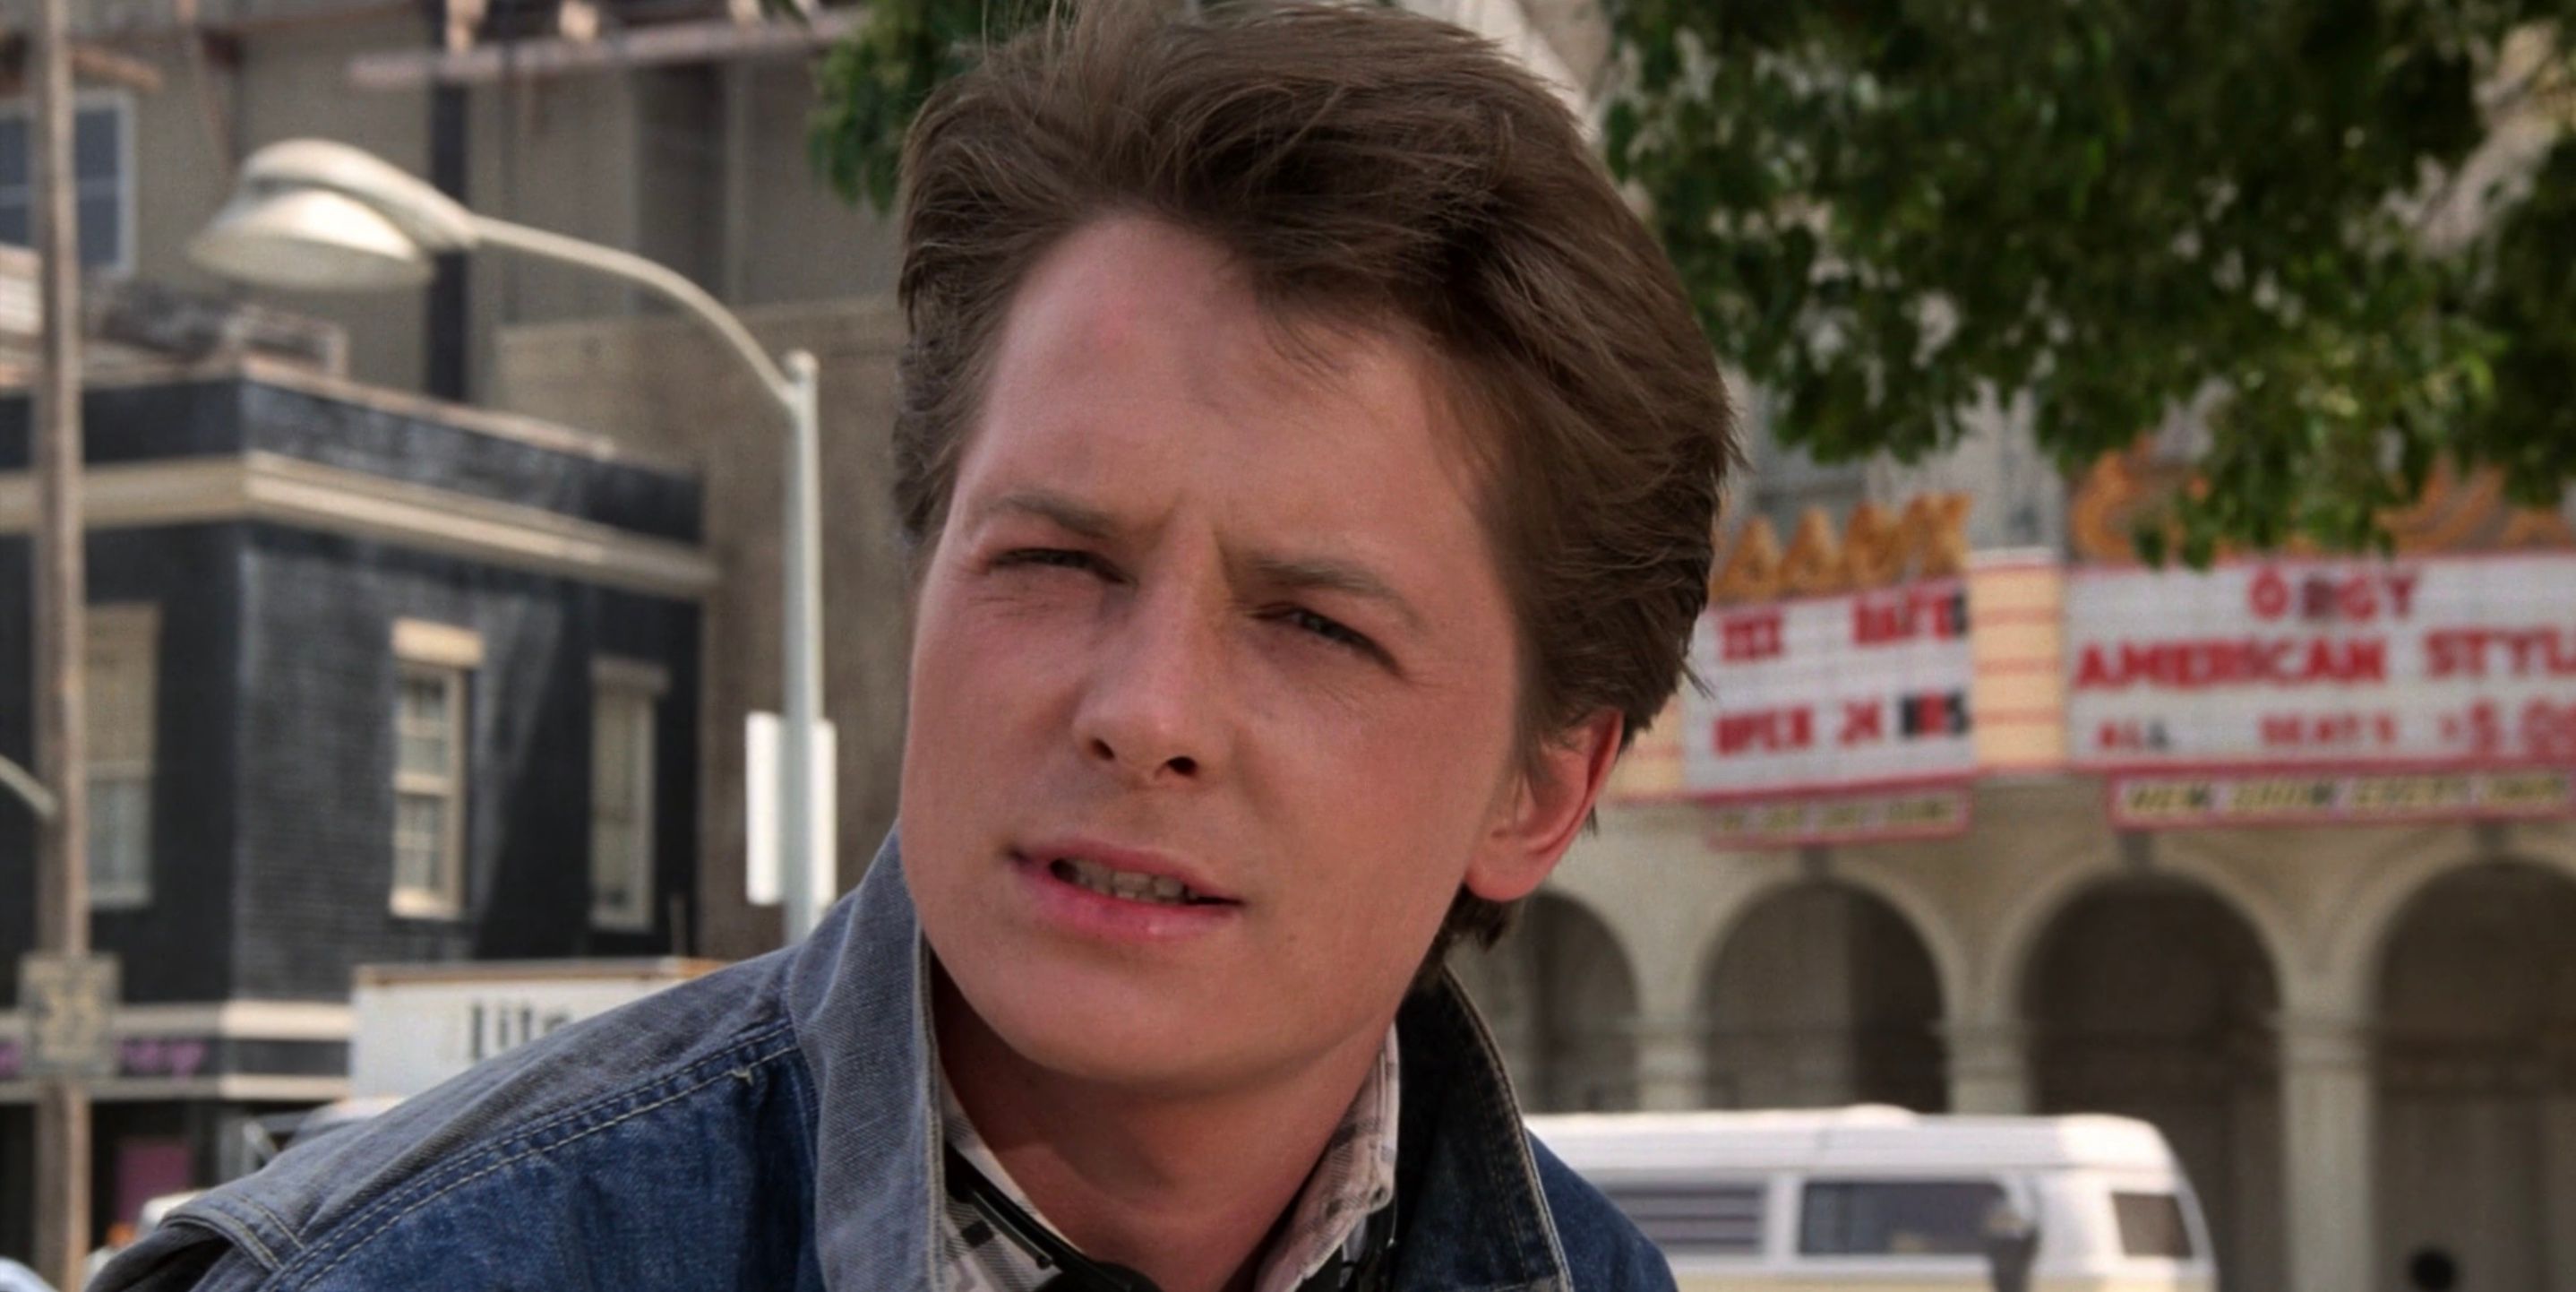 Marty McFly shot with Orgy American Style on theater marquee in the background